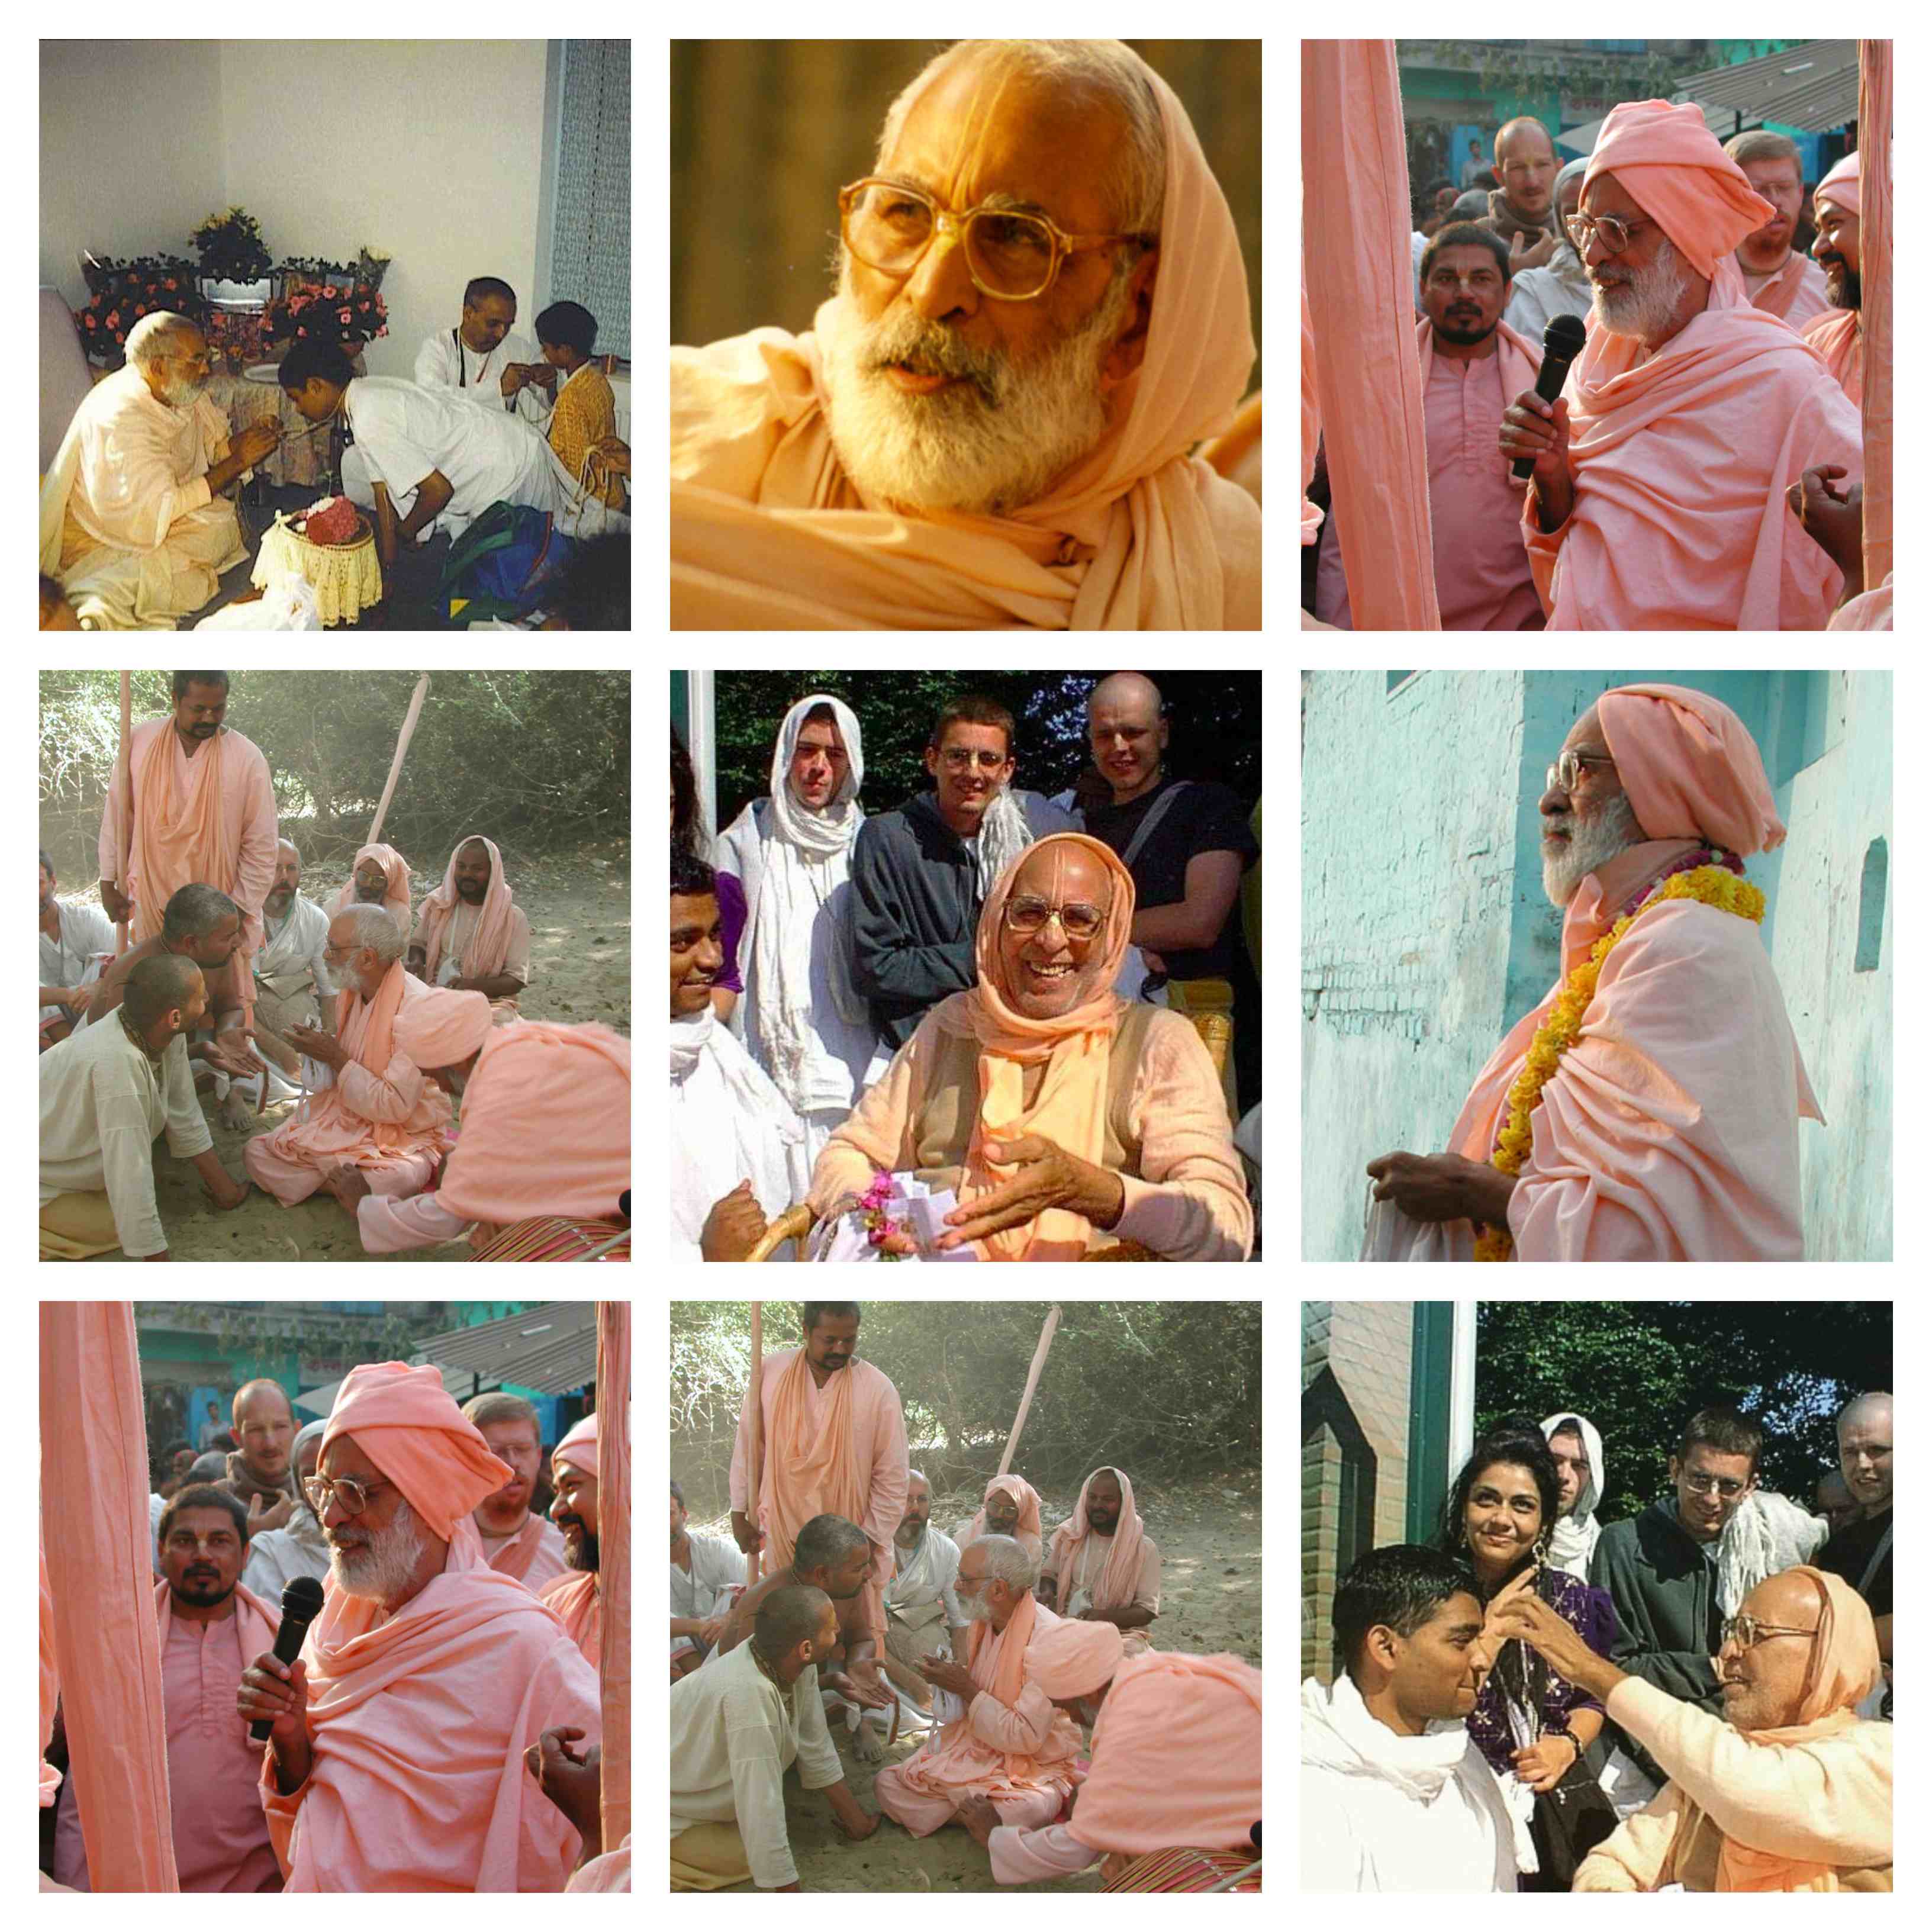 Me, top left, middle and bottom right pictures - with Srila Gurudeva